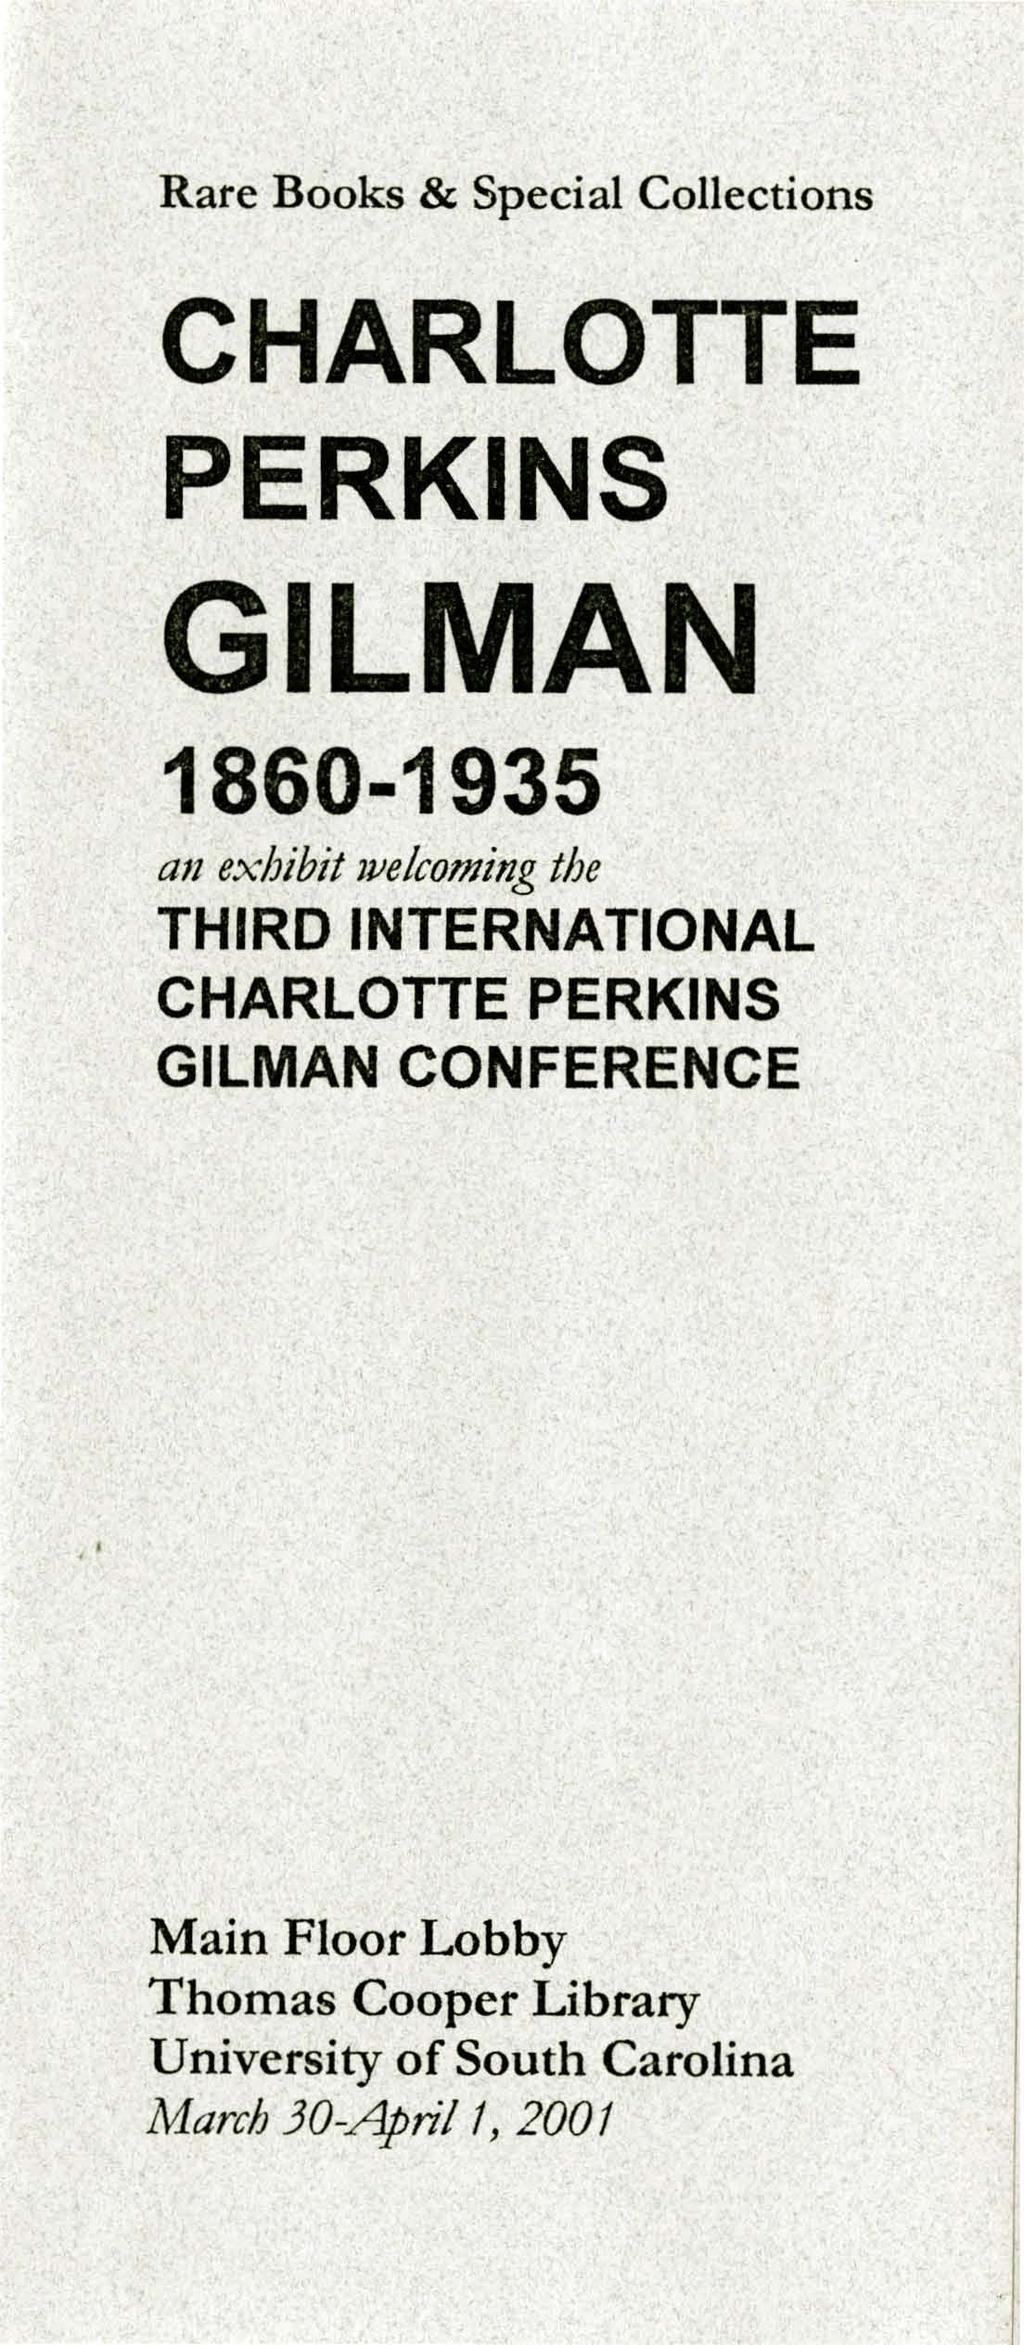 Rare Books & Special Collections CHARLOTTE PERKINS GILMAN 1860-1935 an exhibit 1vefcoming the THIRD INTERNATIONAL